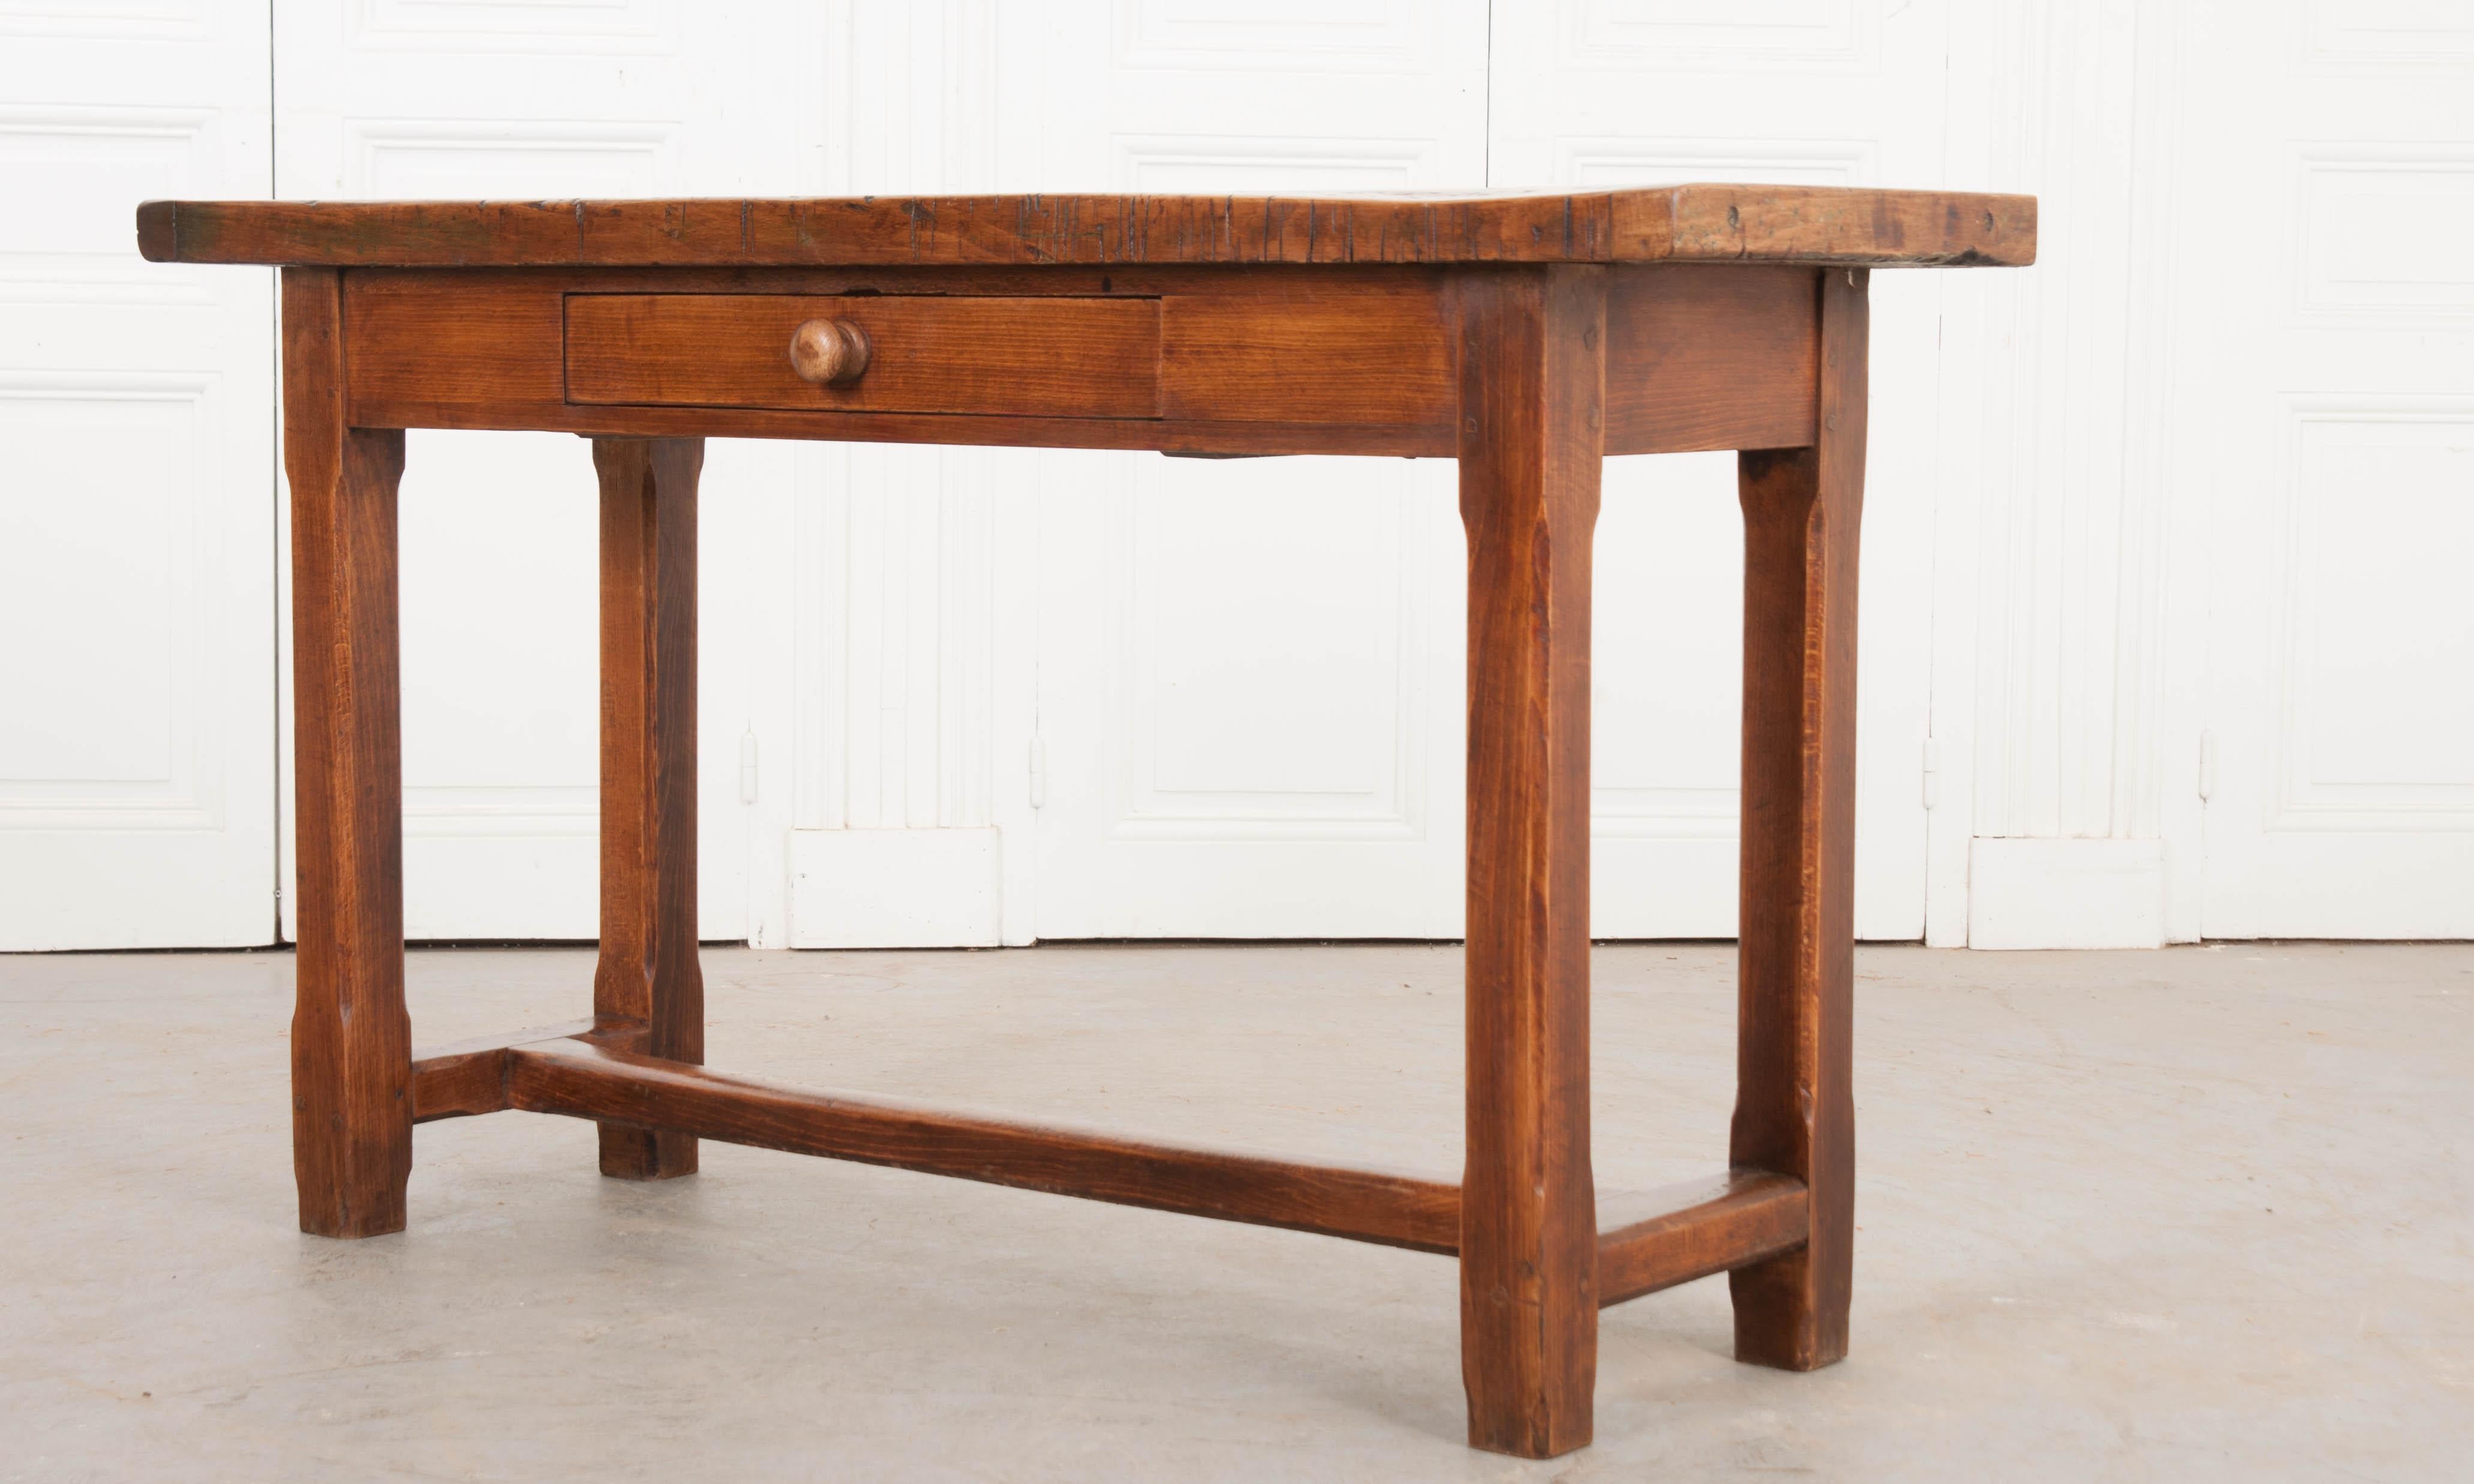 This wonderful English beech server, circa 1860, features a thick two-plank surface above an apron outfitted with a single drawer with a turned pull, raised by square chamfered legs and having an H-form stretcher. This server would work well in a